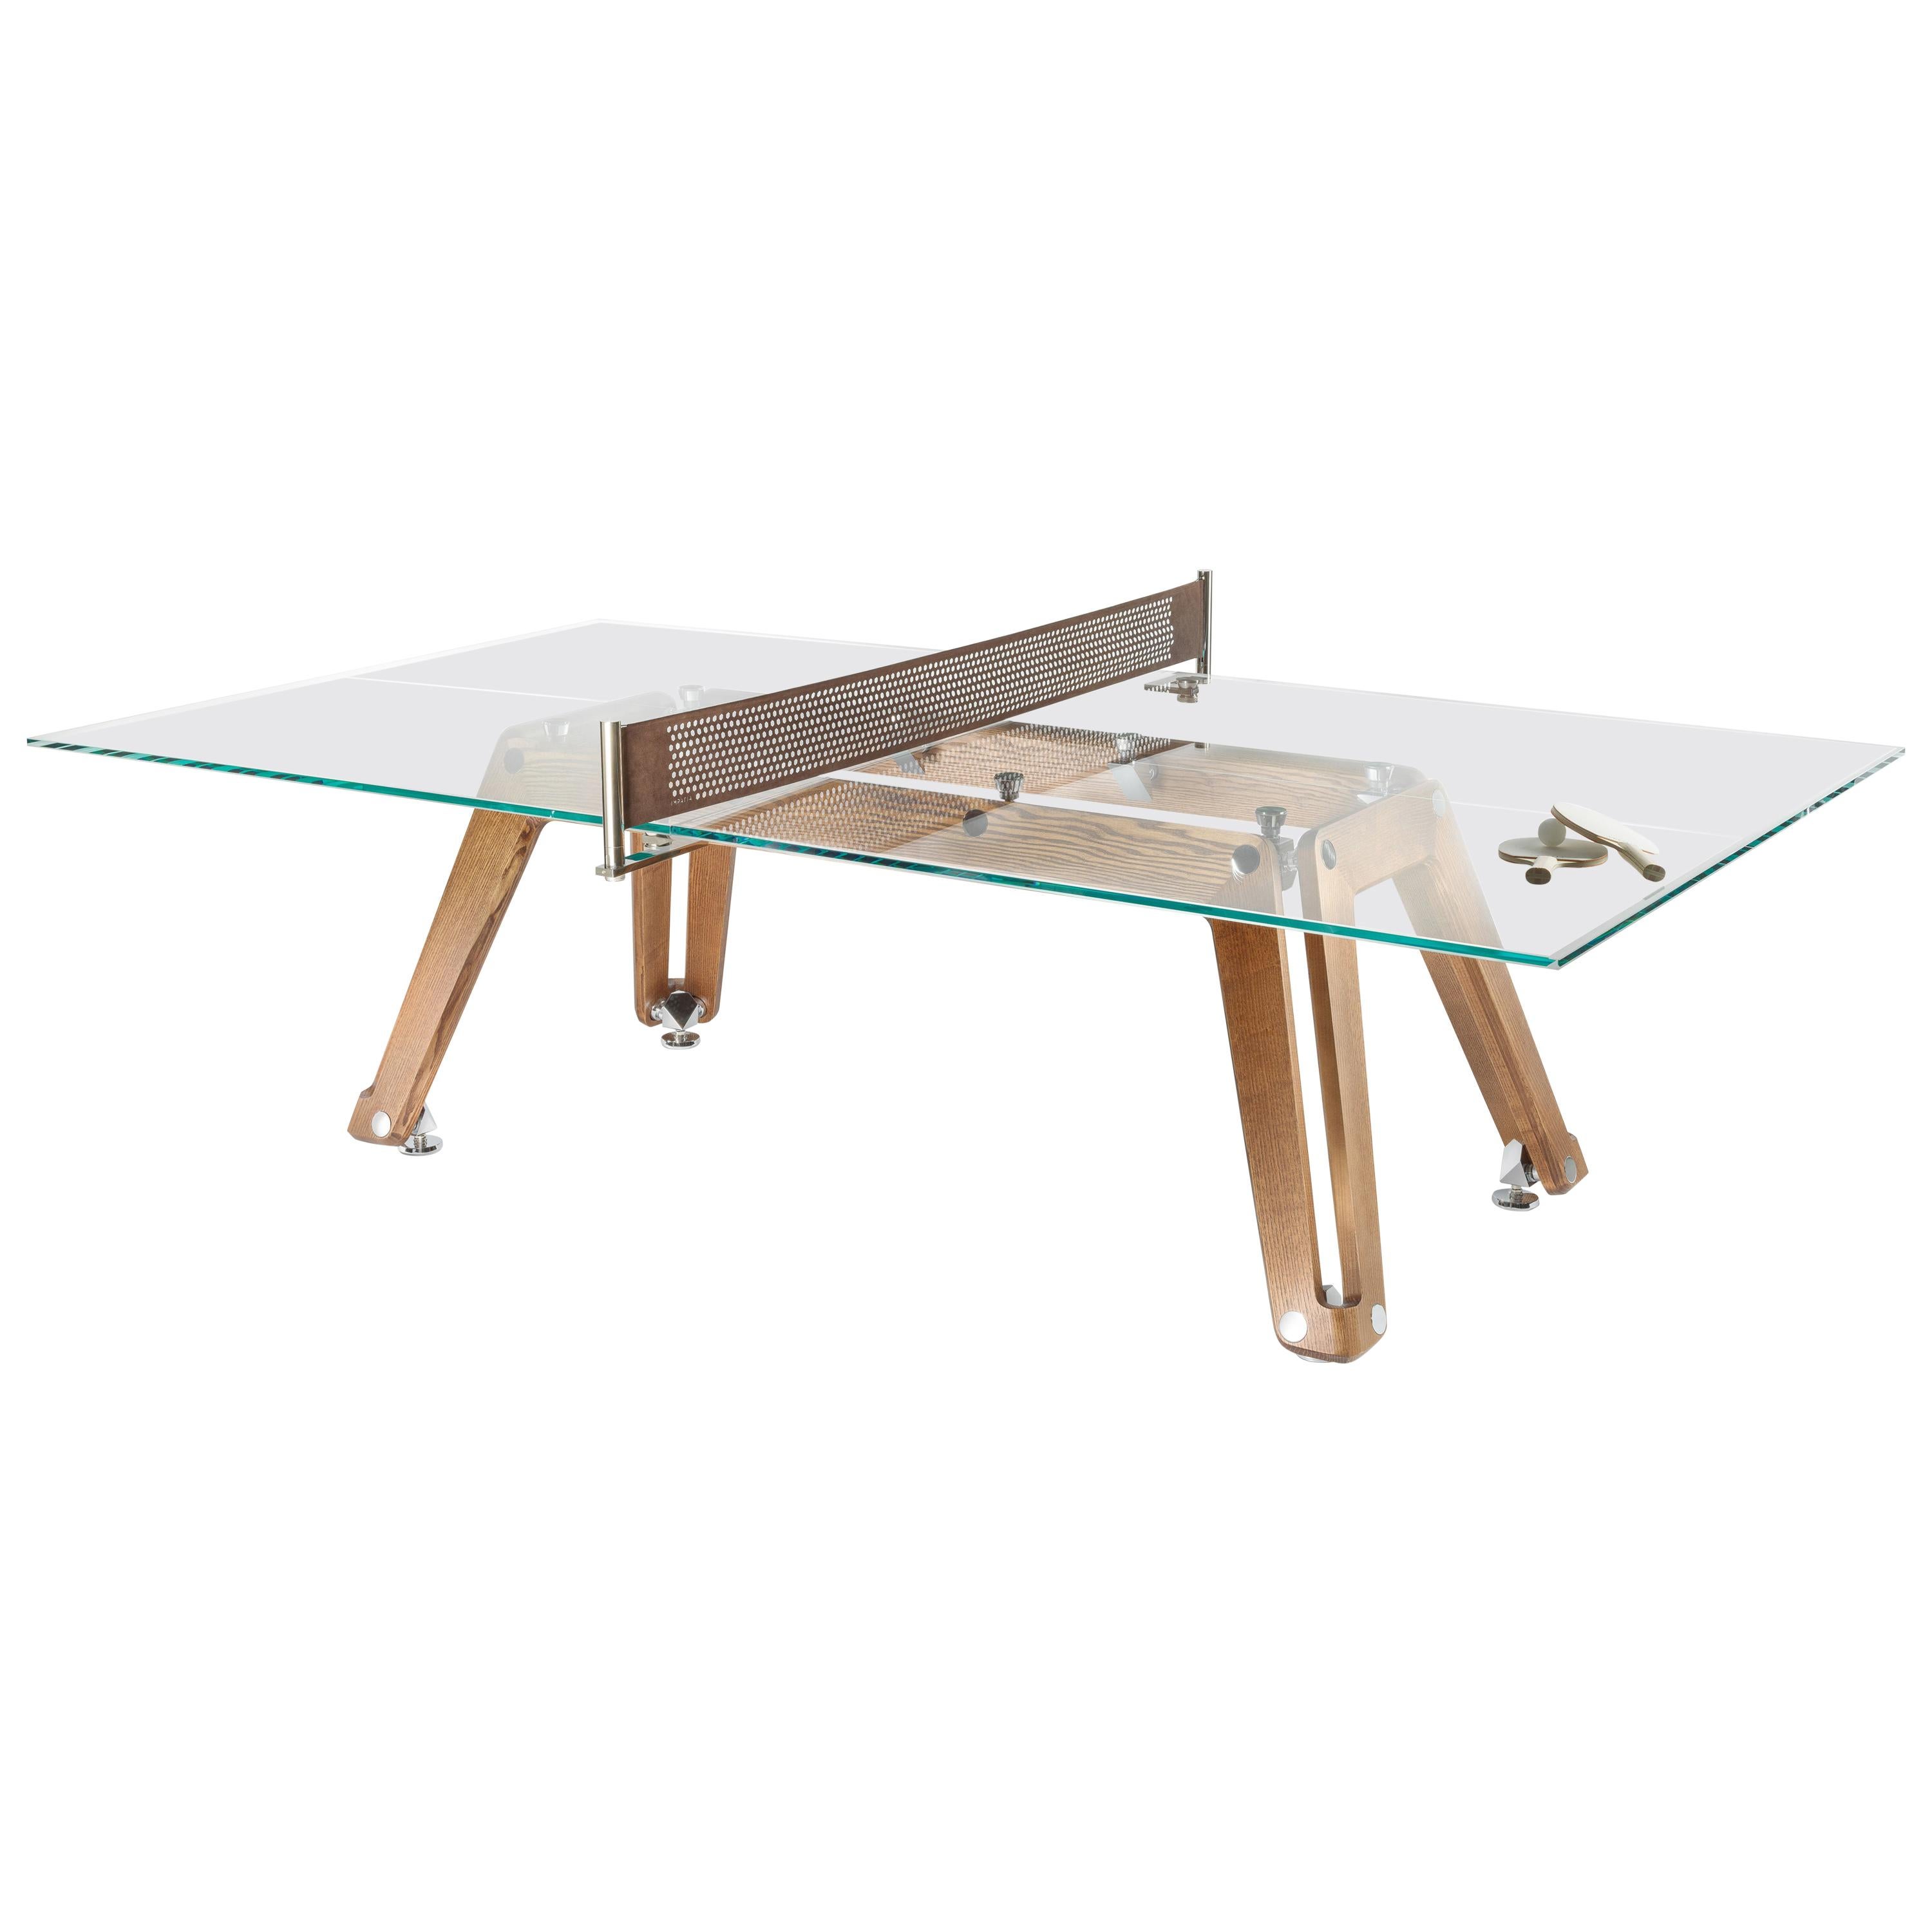 Custom Design Glass Ping Pong Table With Modern Wood Base by Impatia